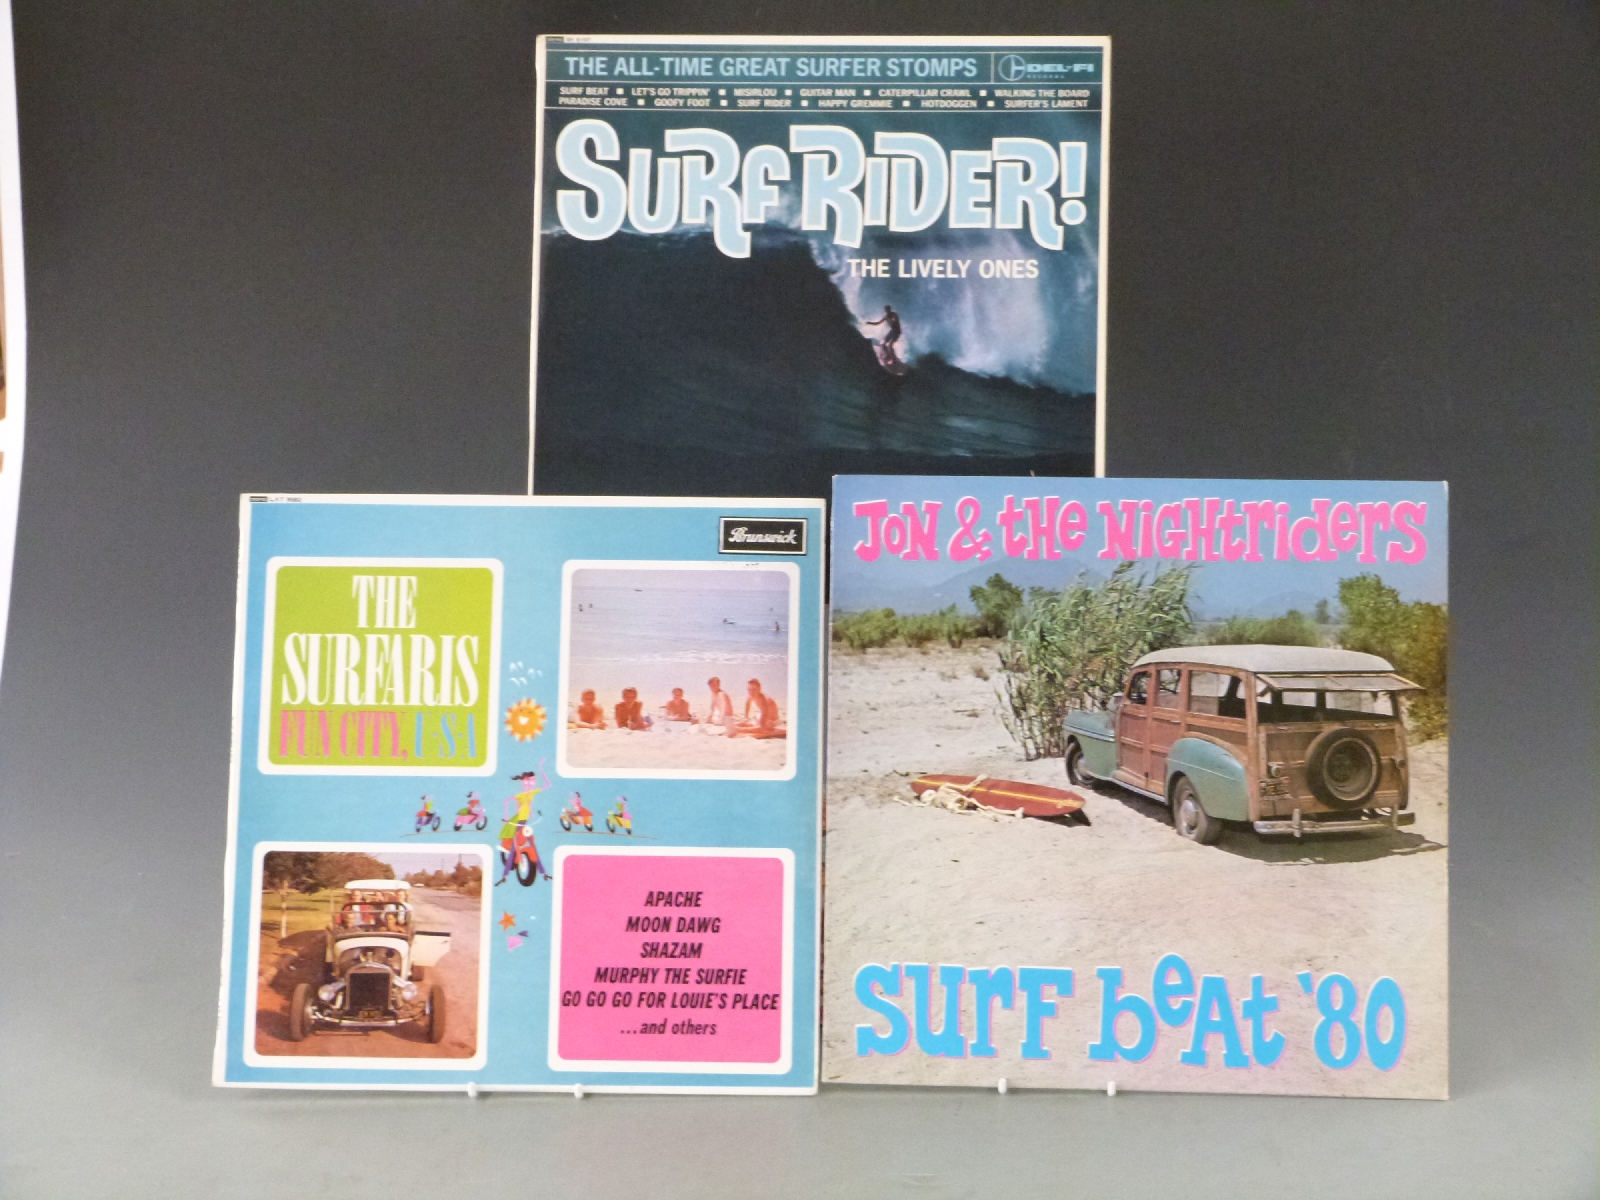 Surf - The Lively Ones - Surf Rider! (SH 8107), The Surfaris - Fun City USA (LAT 8582) and Jon and